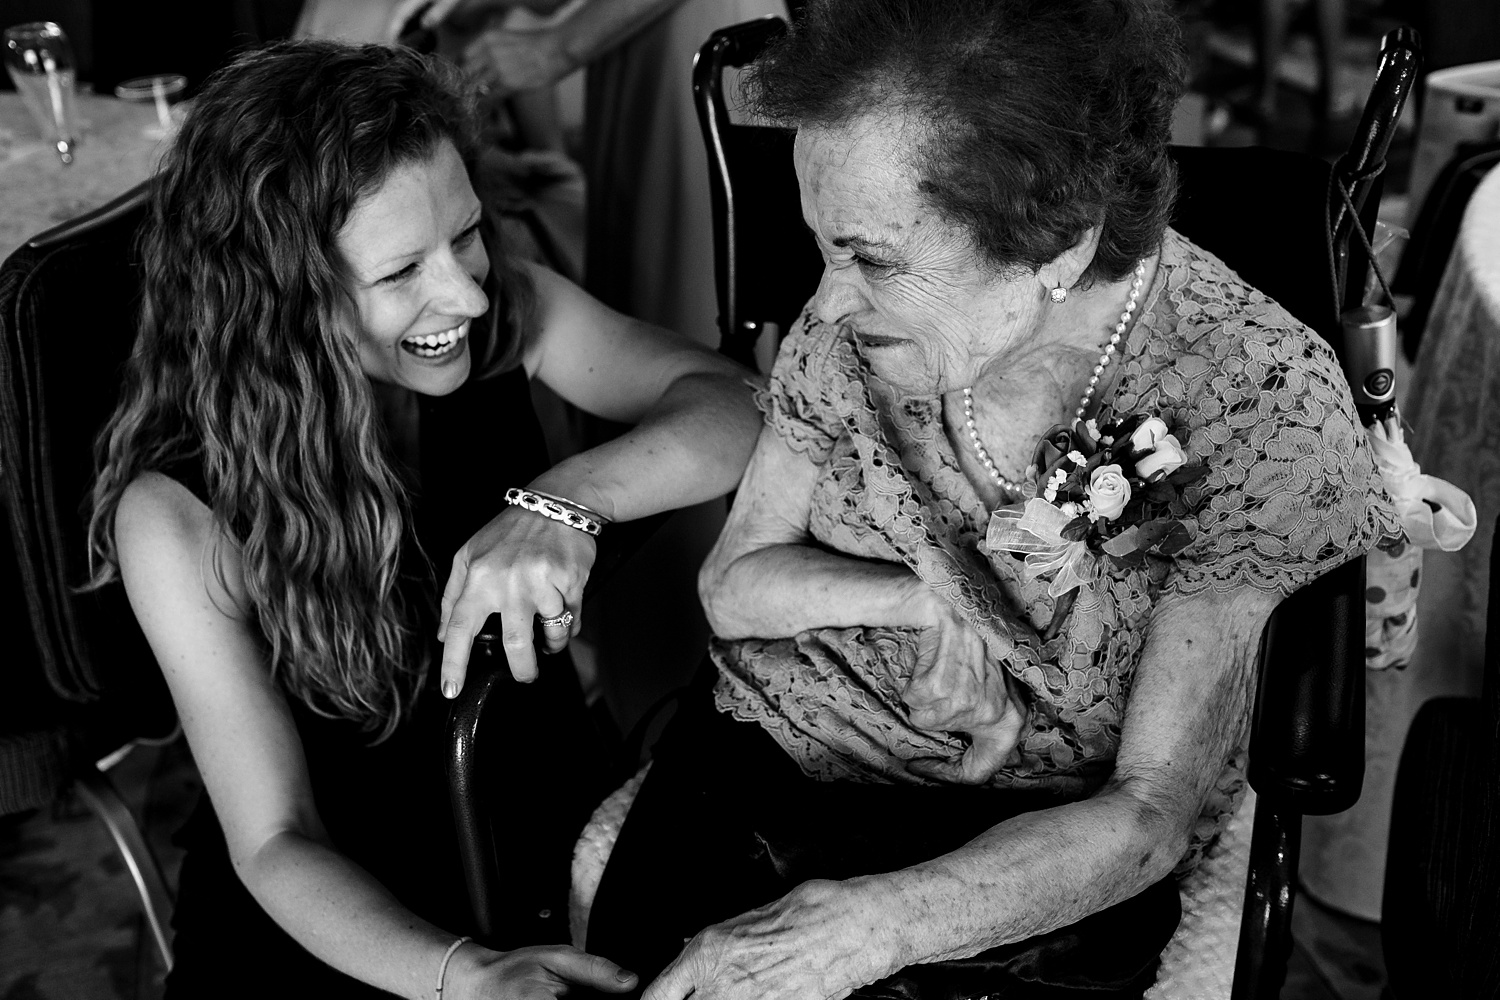 Grandma and her granddaughter on the wedding day share a moment